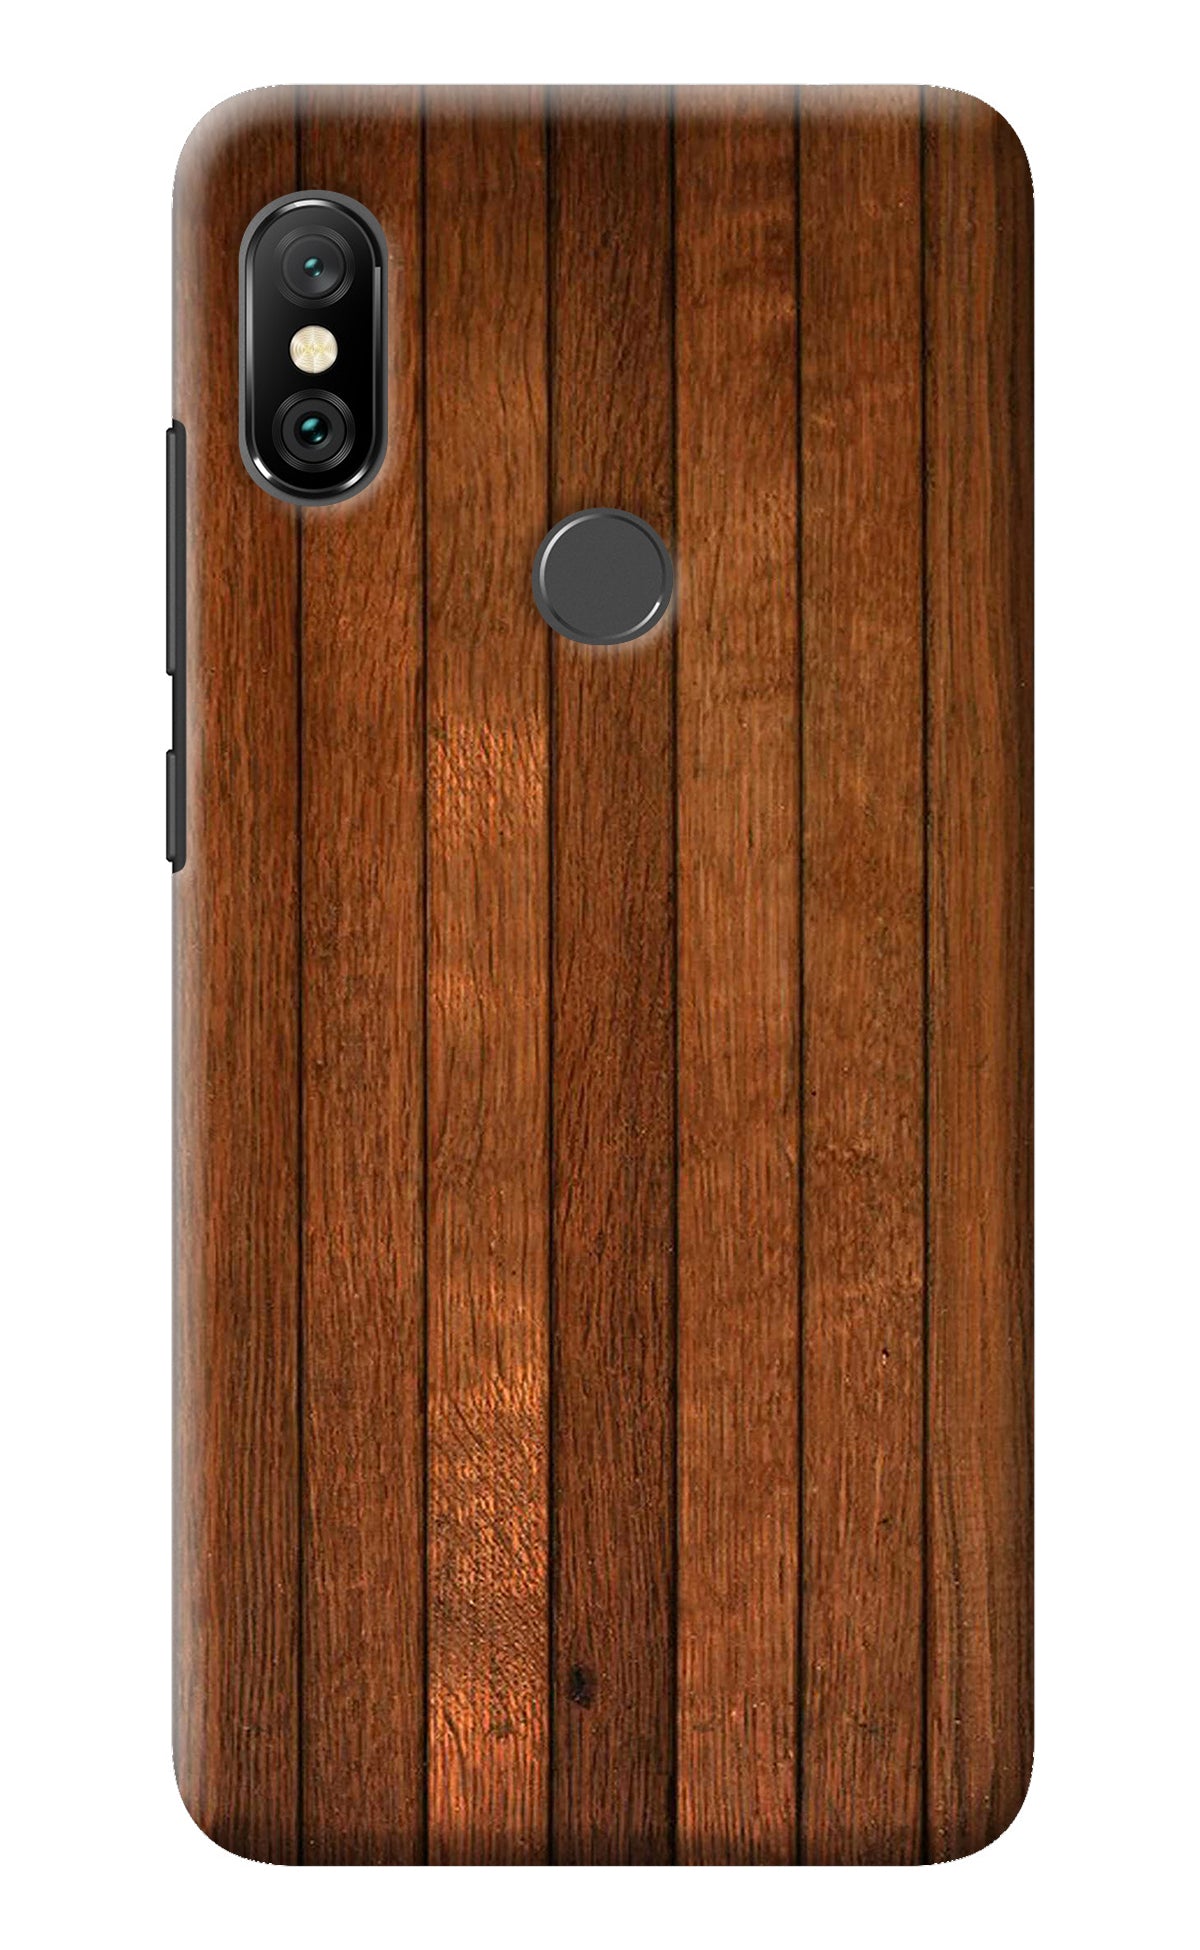 Wooden Artwork Bands Redmi Note 6 Pro Back Cover